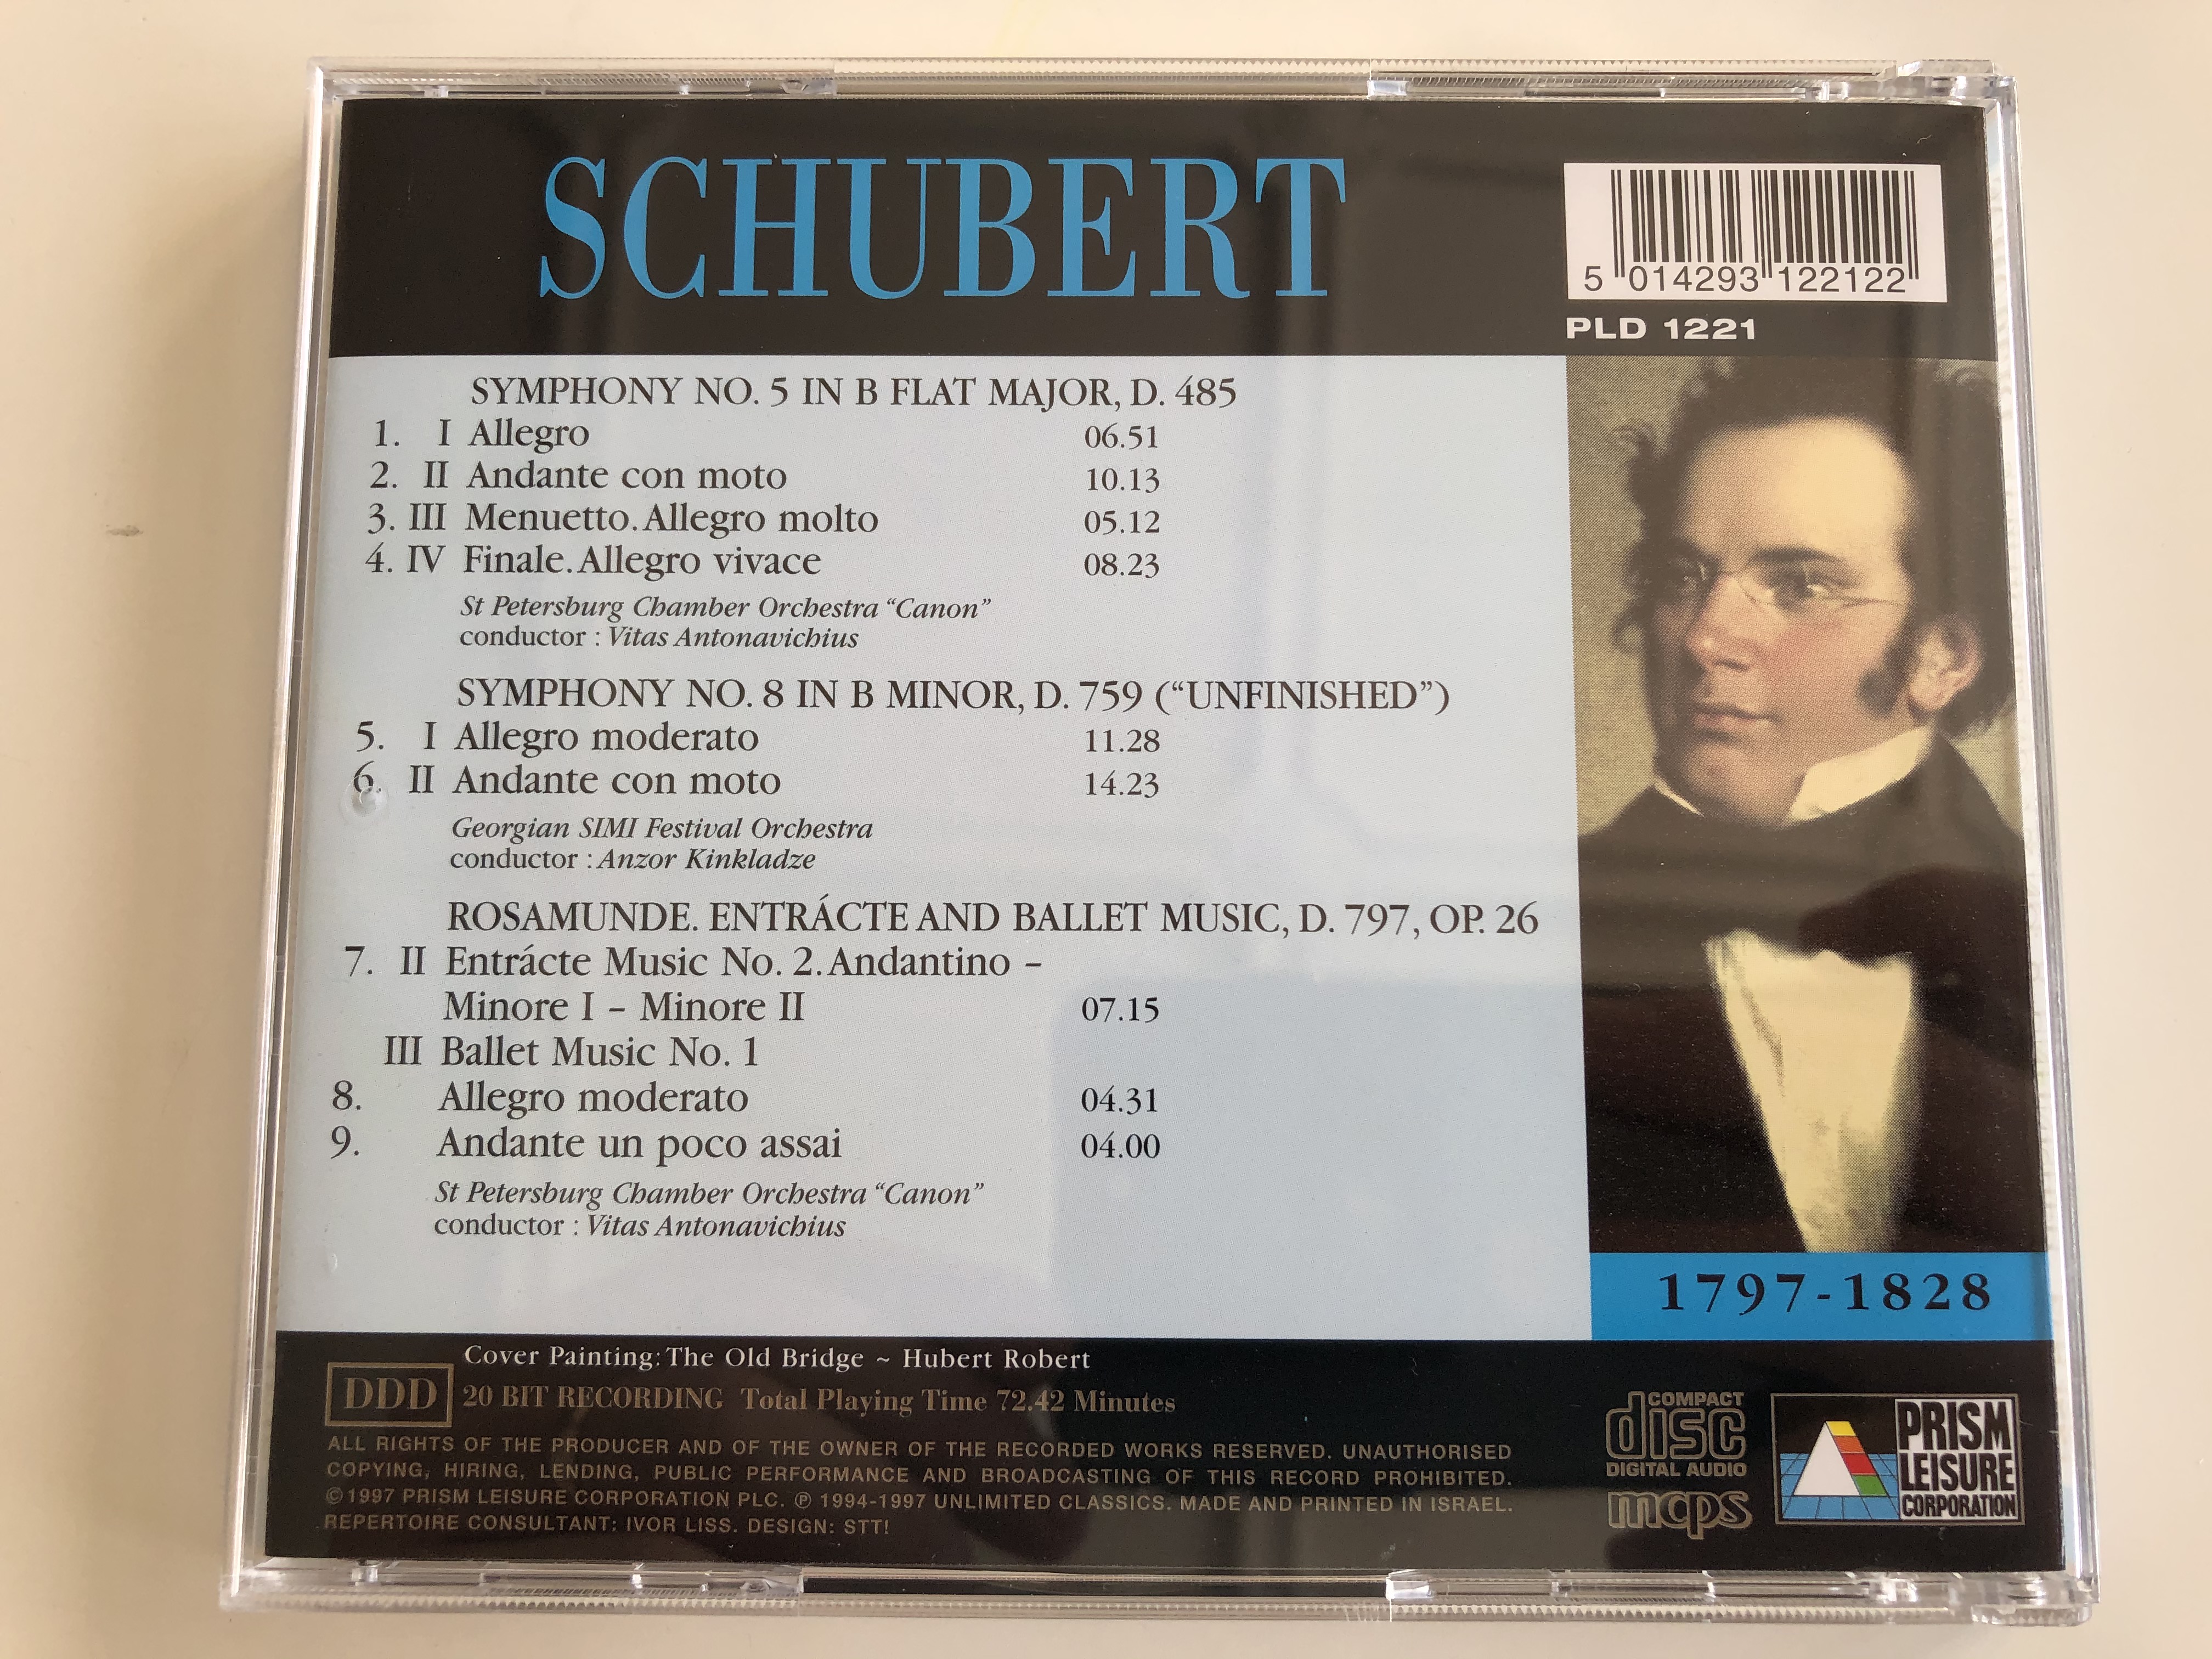 schubert-symphonies-no.5-no.8-unfinished-georgian-simi-festival-orchestra-playing-time-7242-prism-leisure-audio-cd-1997-pld-1221-4-.jpg